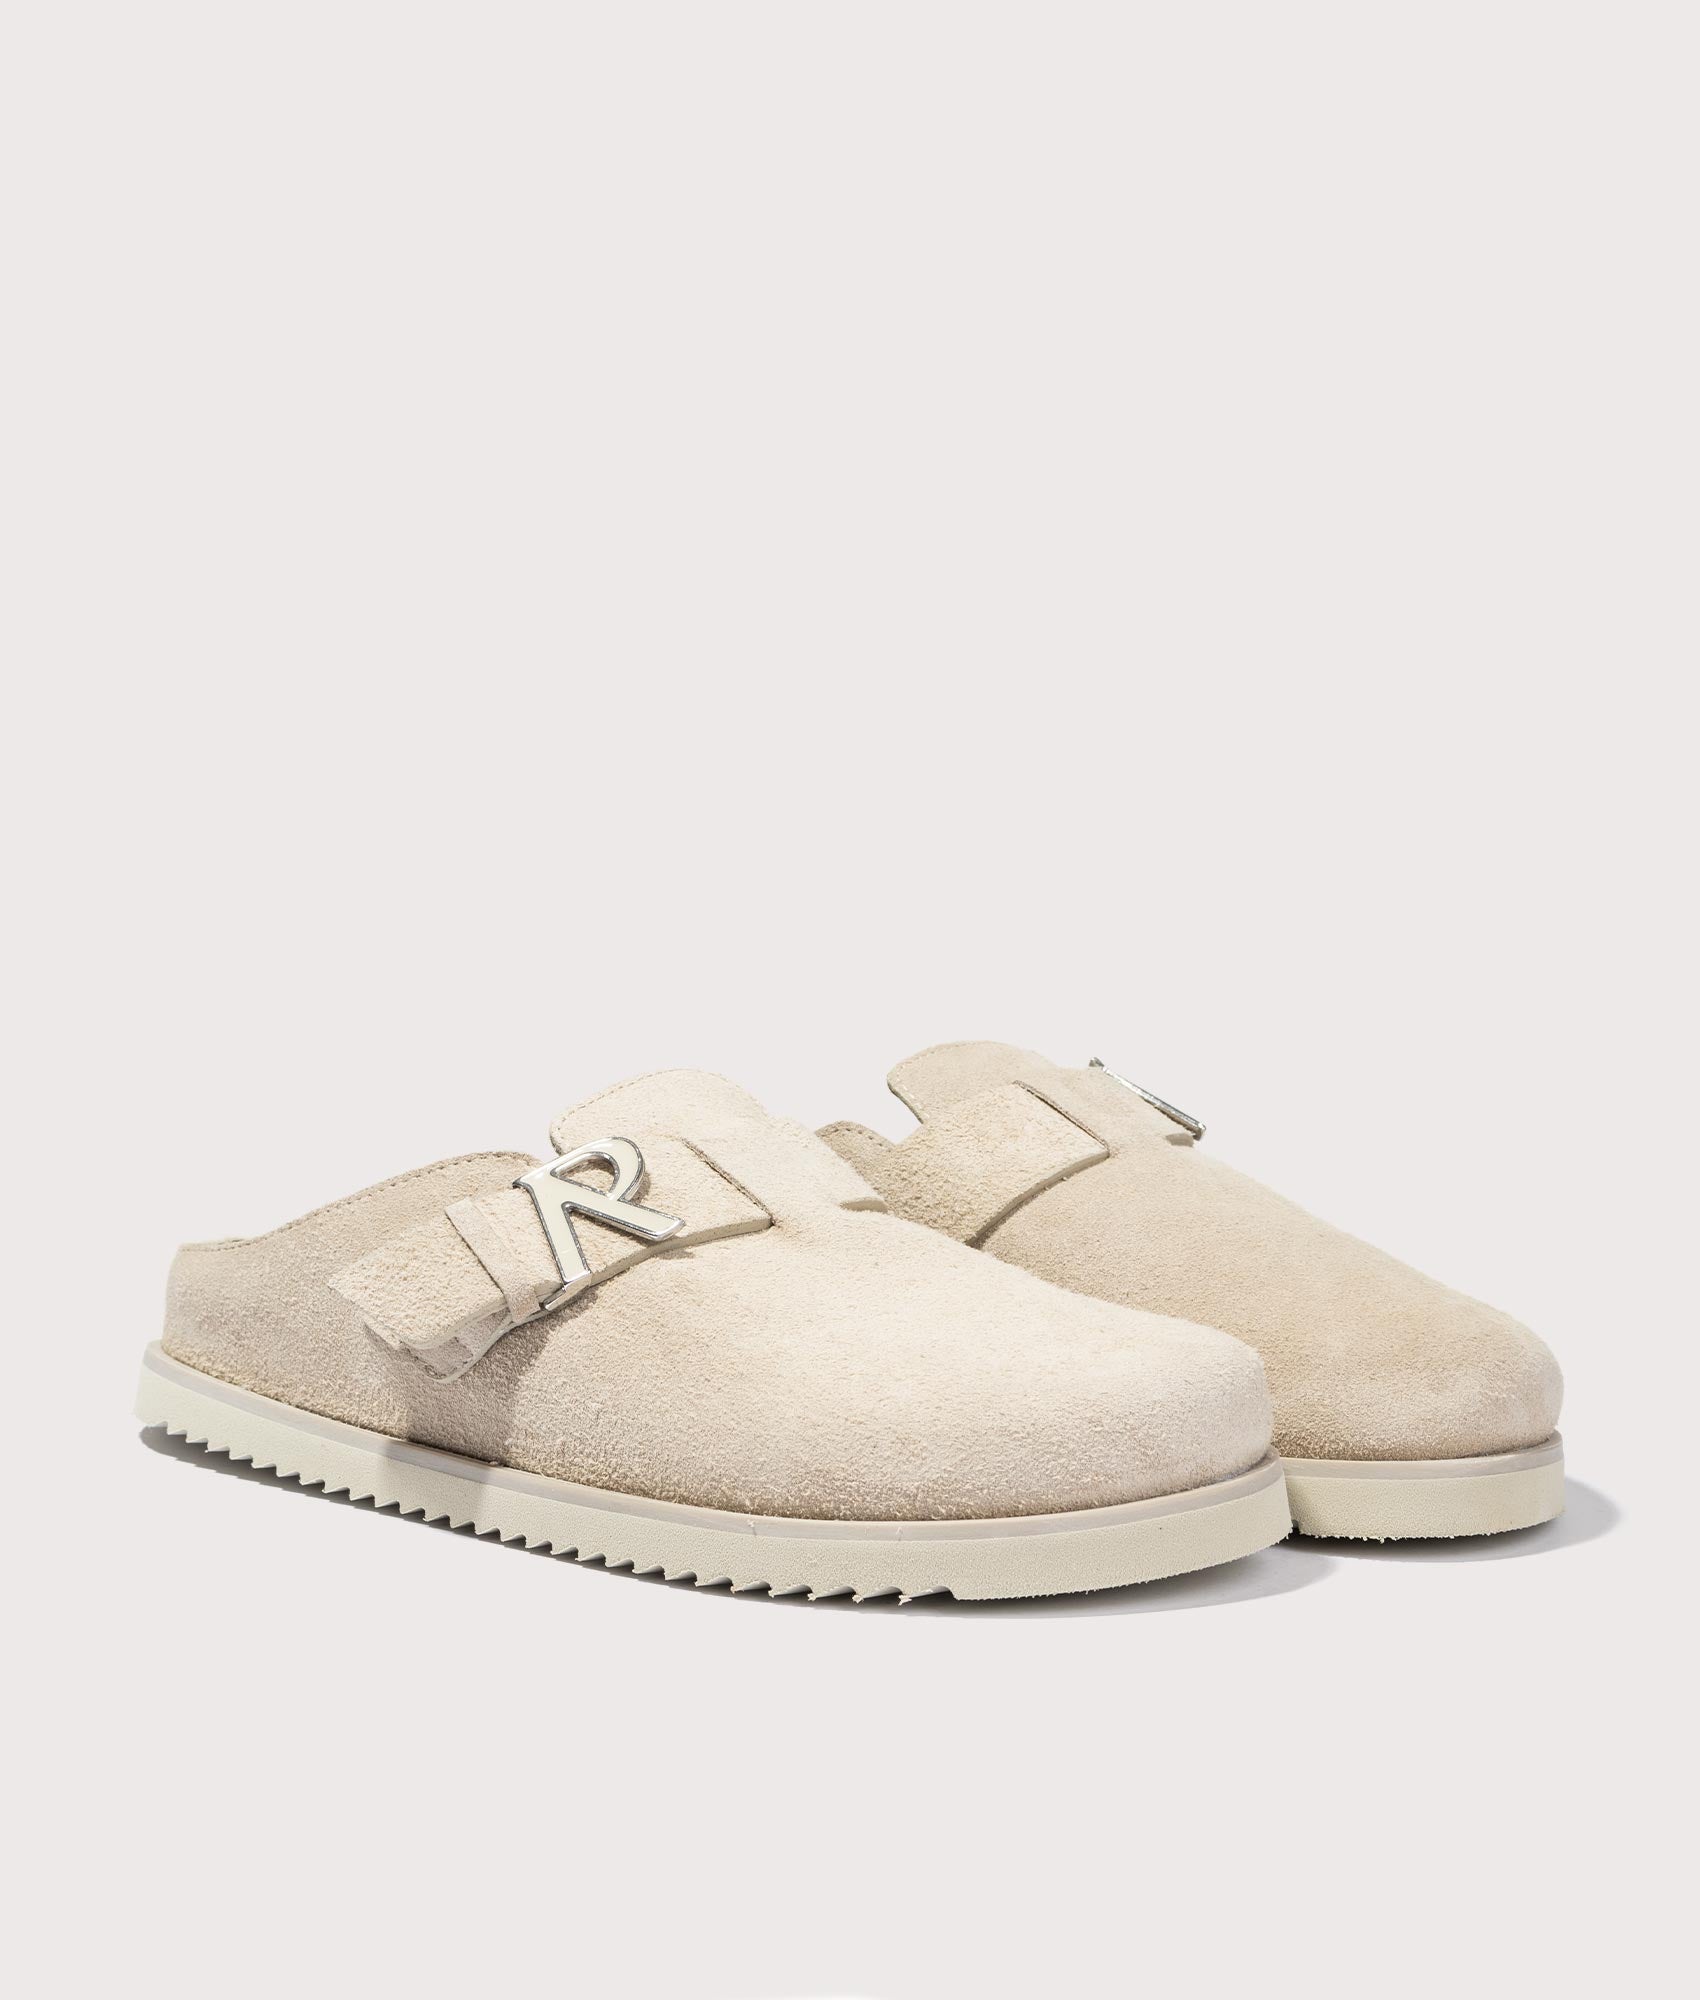 Represent Mens Initial Mules - Colour: 38 Taupe - Size: 11